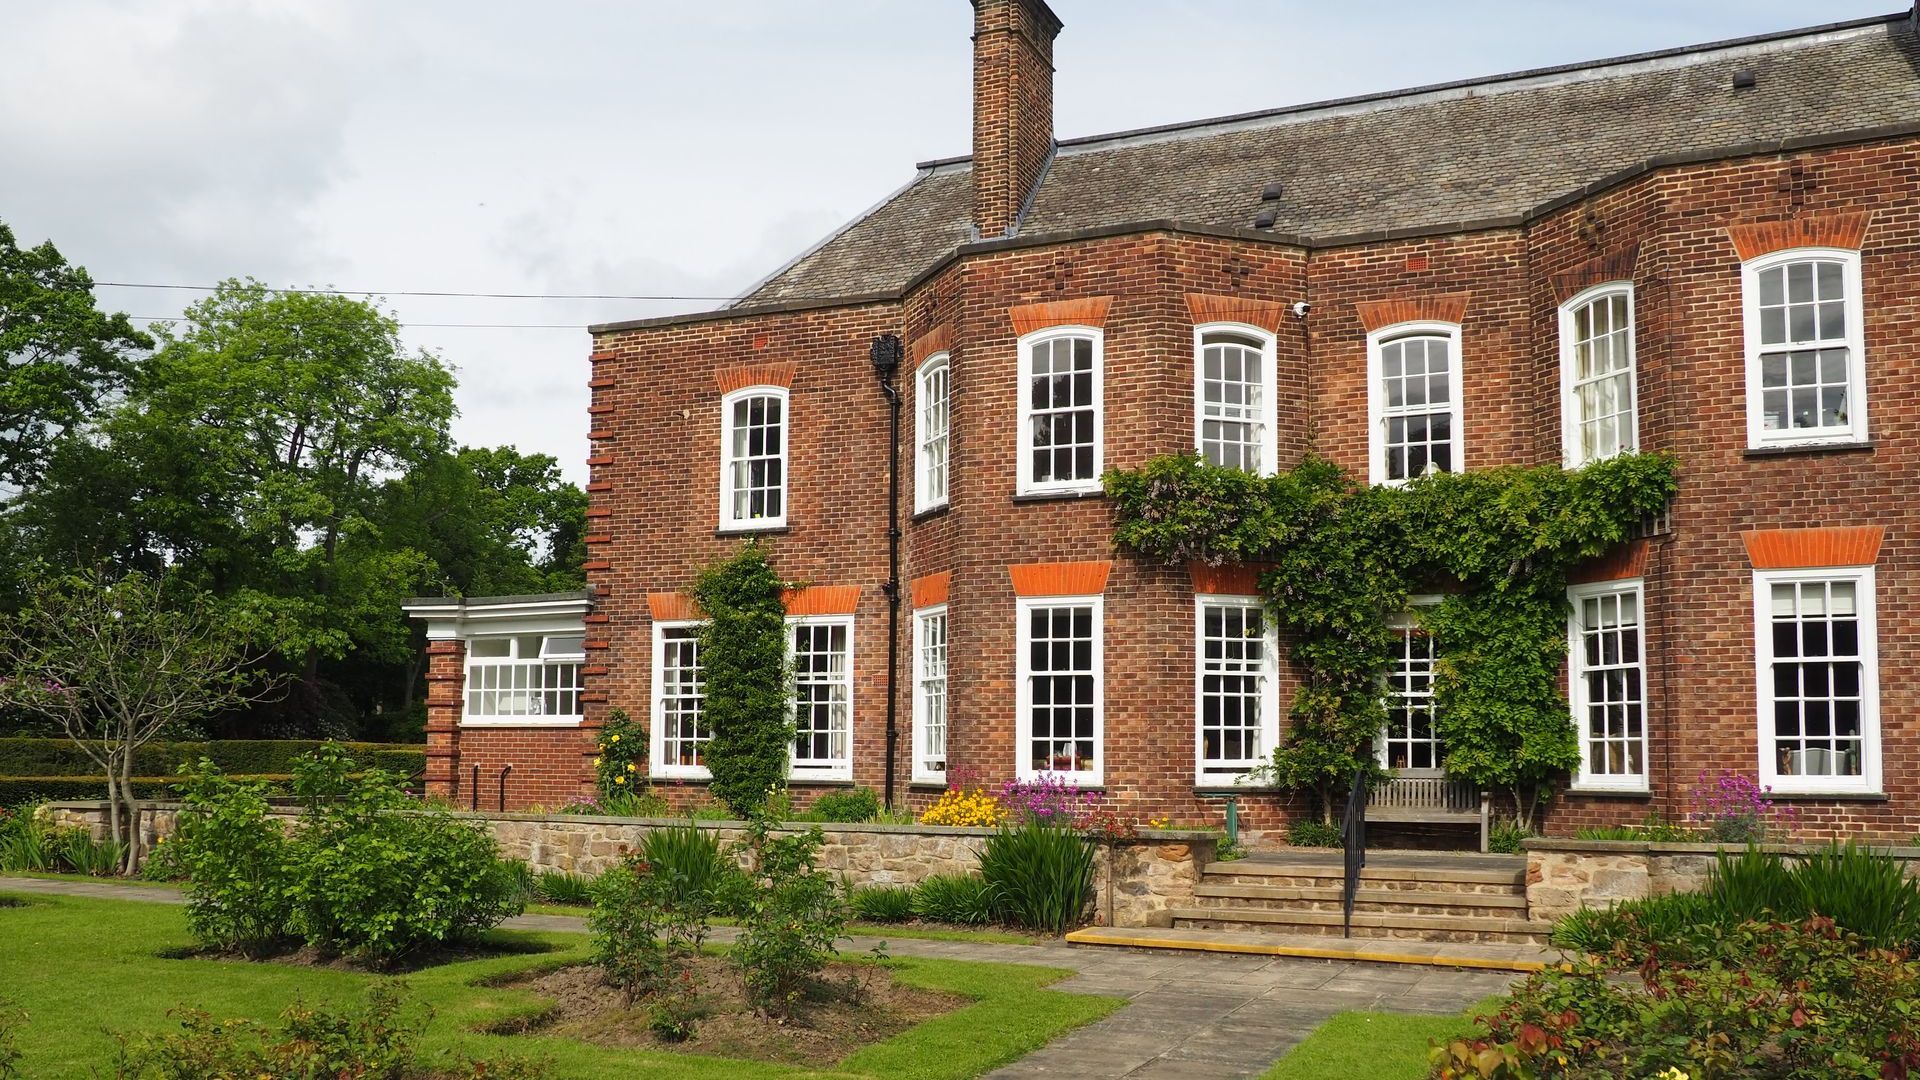 A red brick building surrounded by well maintained garden